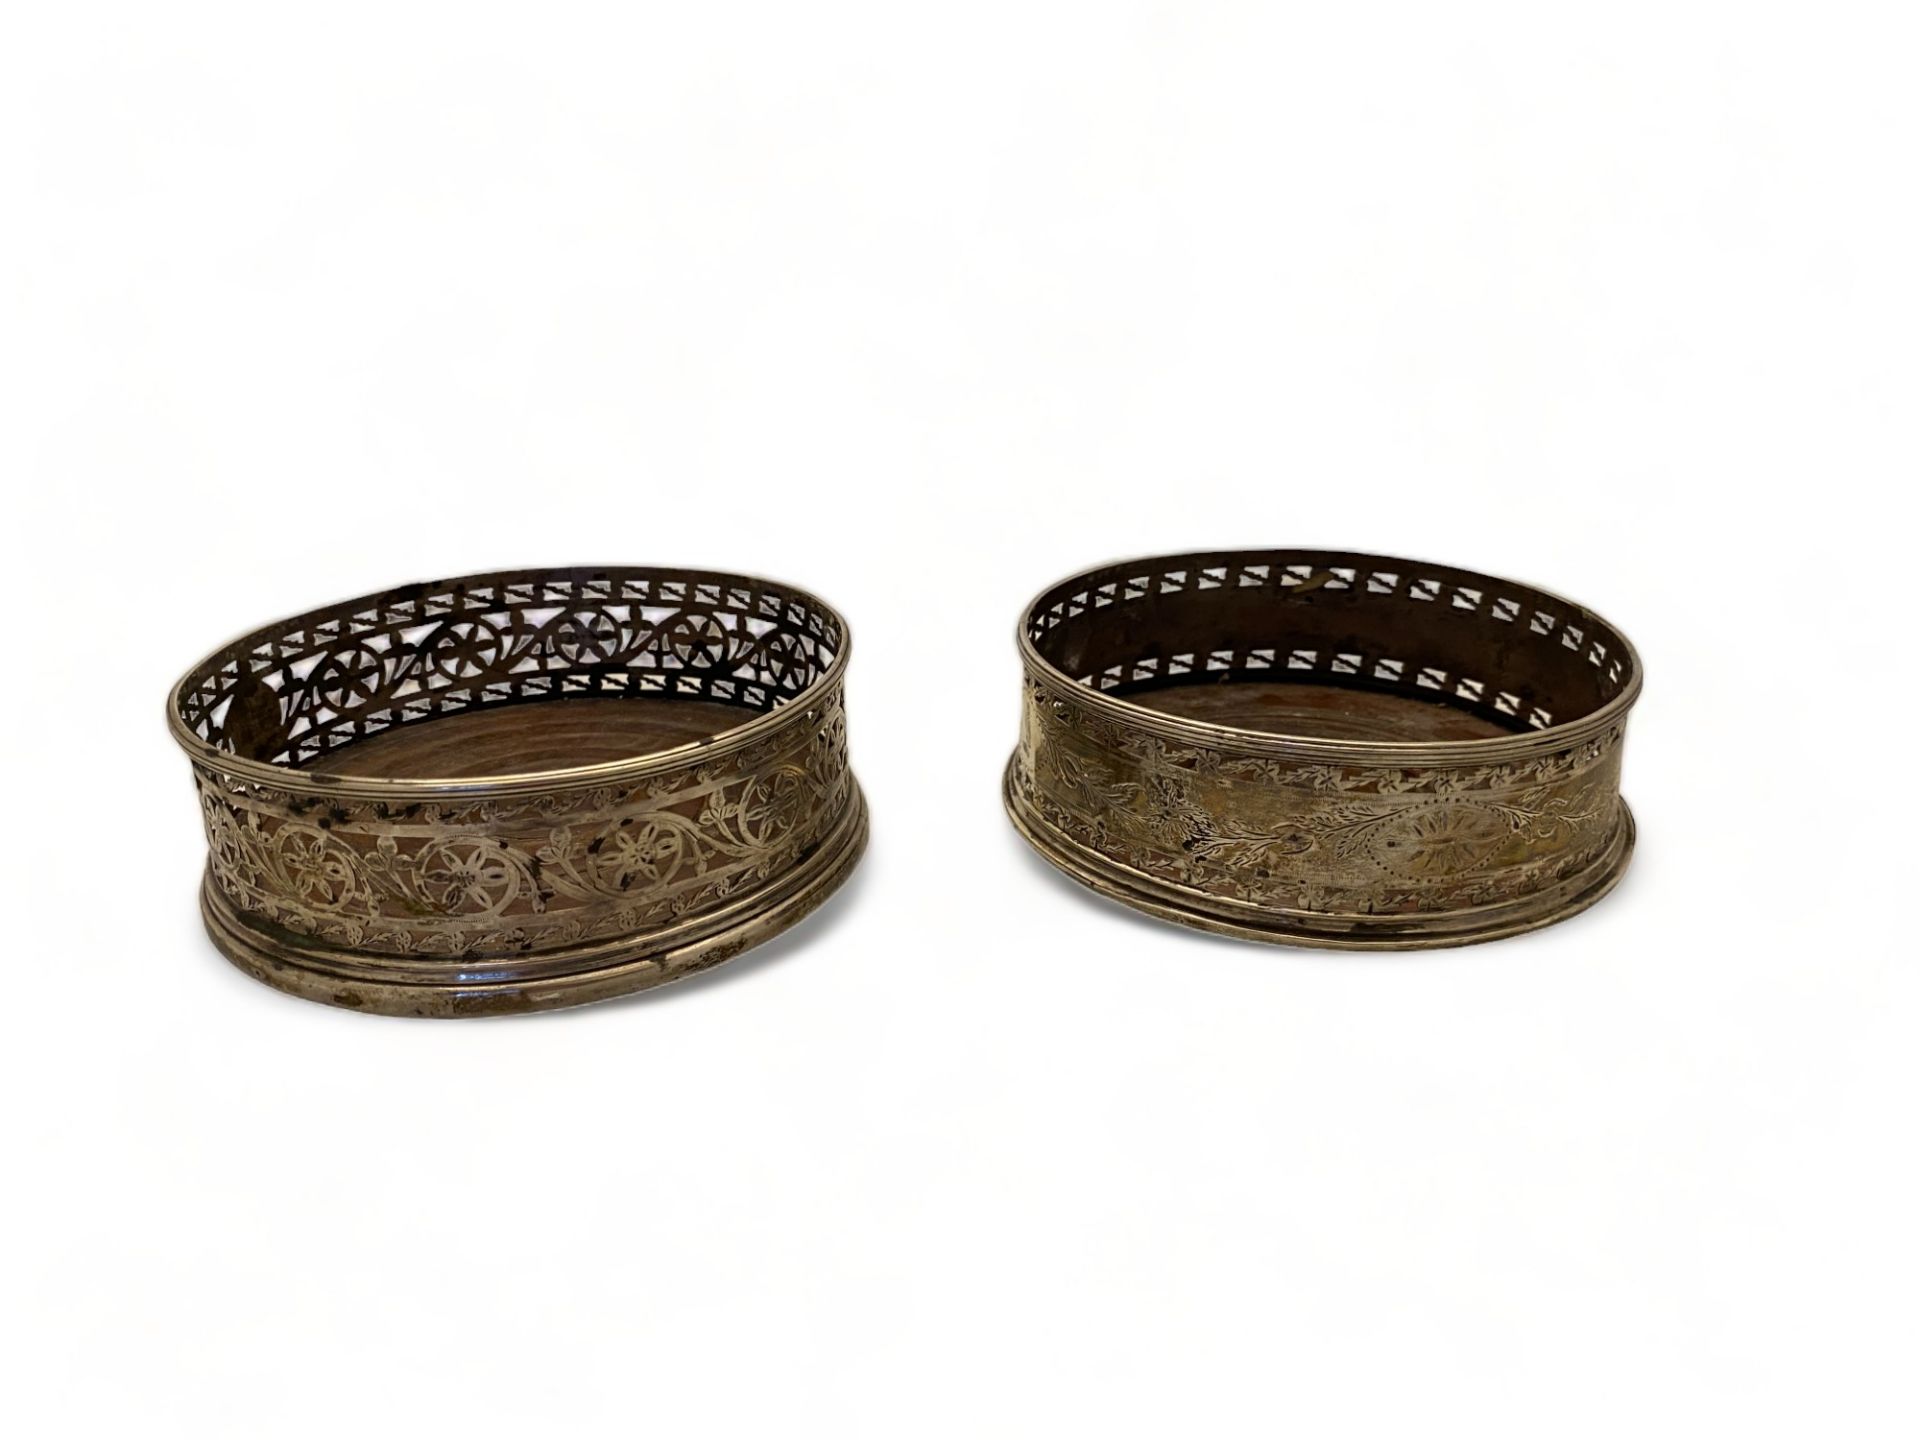 Two late 19th / early 20th century silver plated pierced and engraved wine coasters - Image 2 of 6